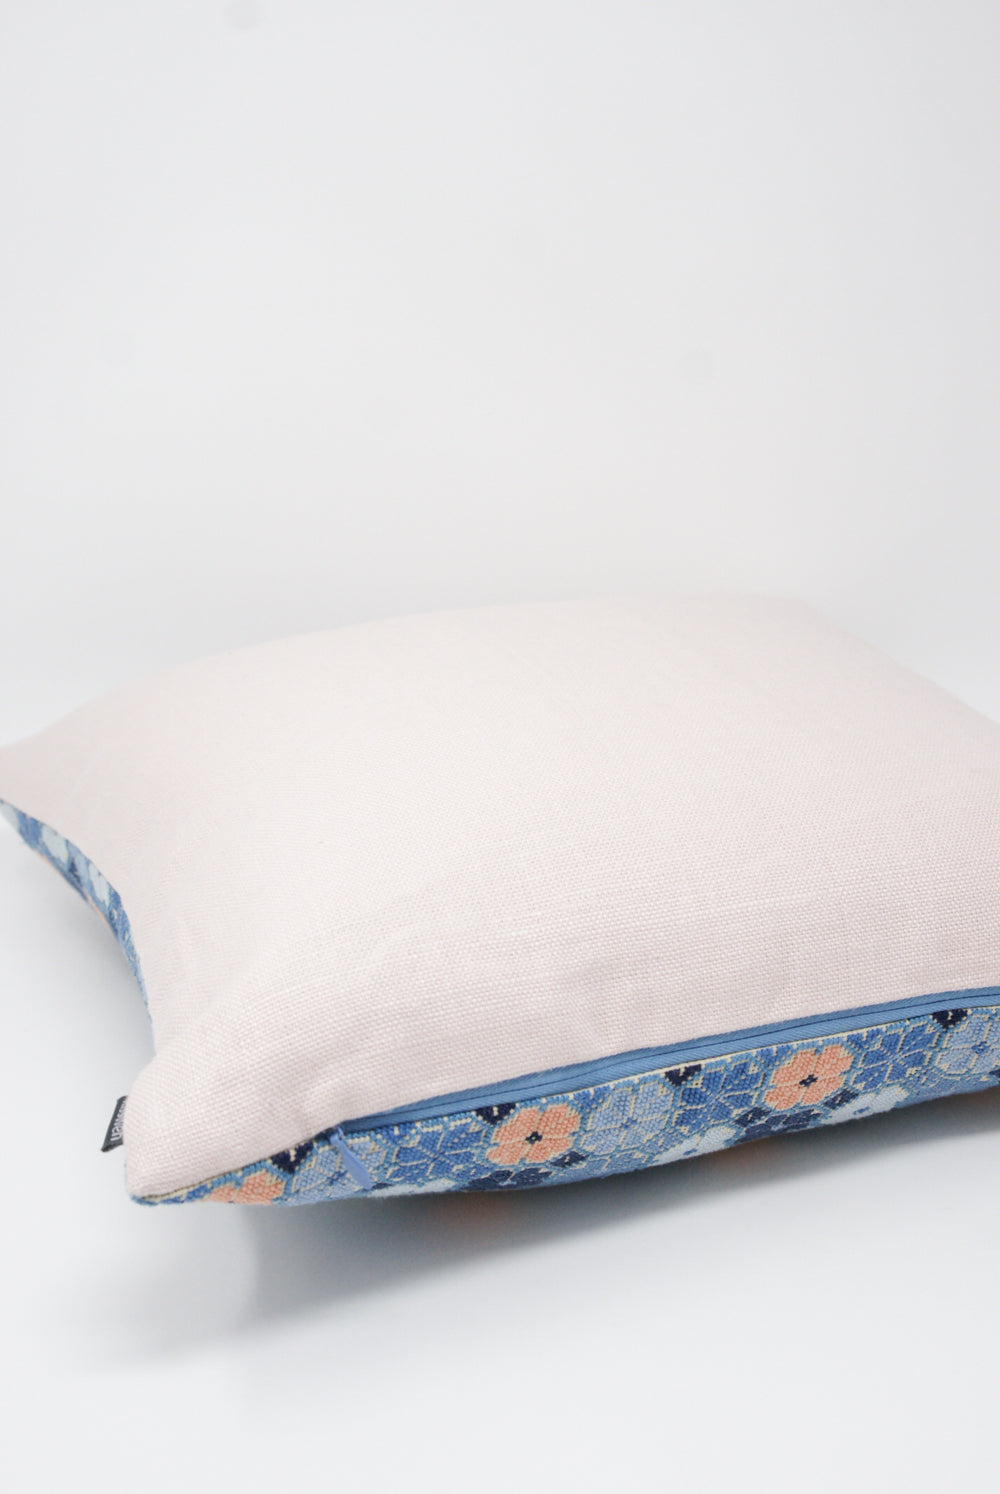 Kissweh Damask Rose Hand Embroidered Pillow in Indigo & Peach back and zipper detail